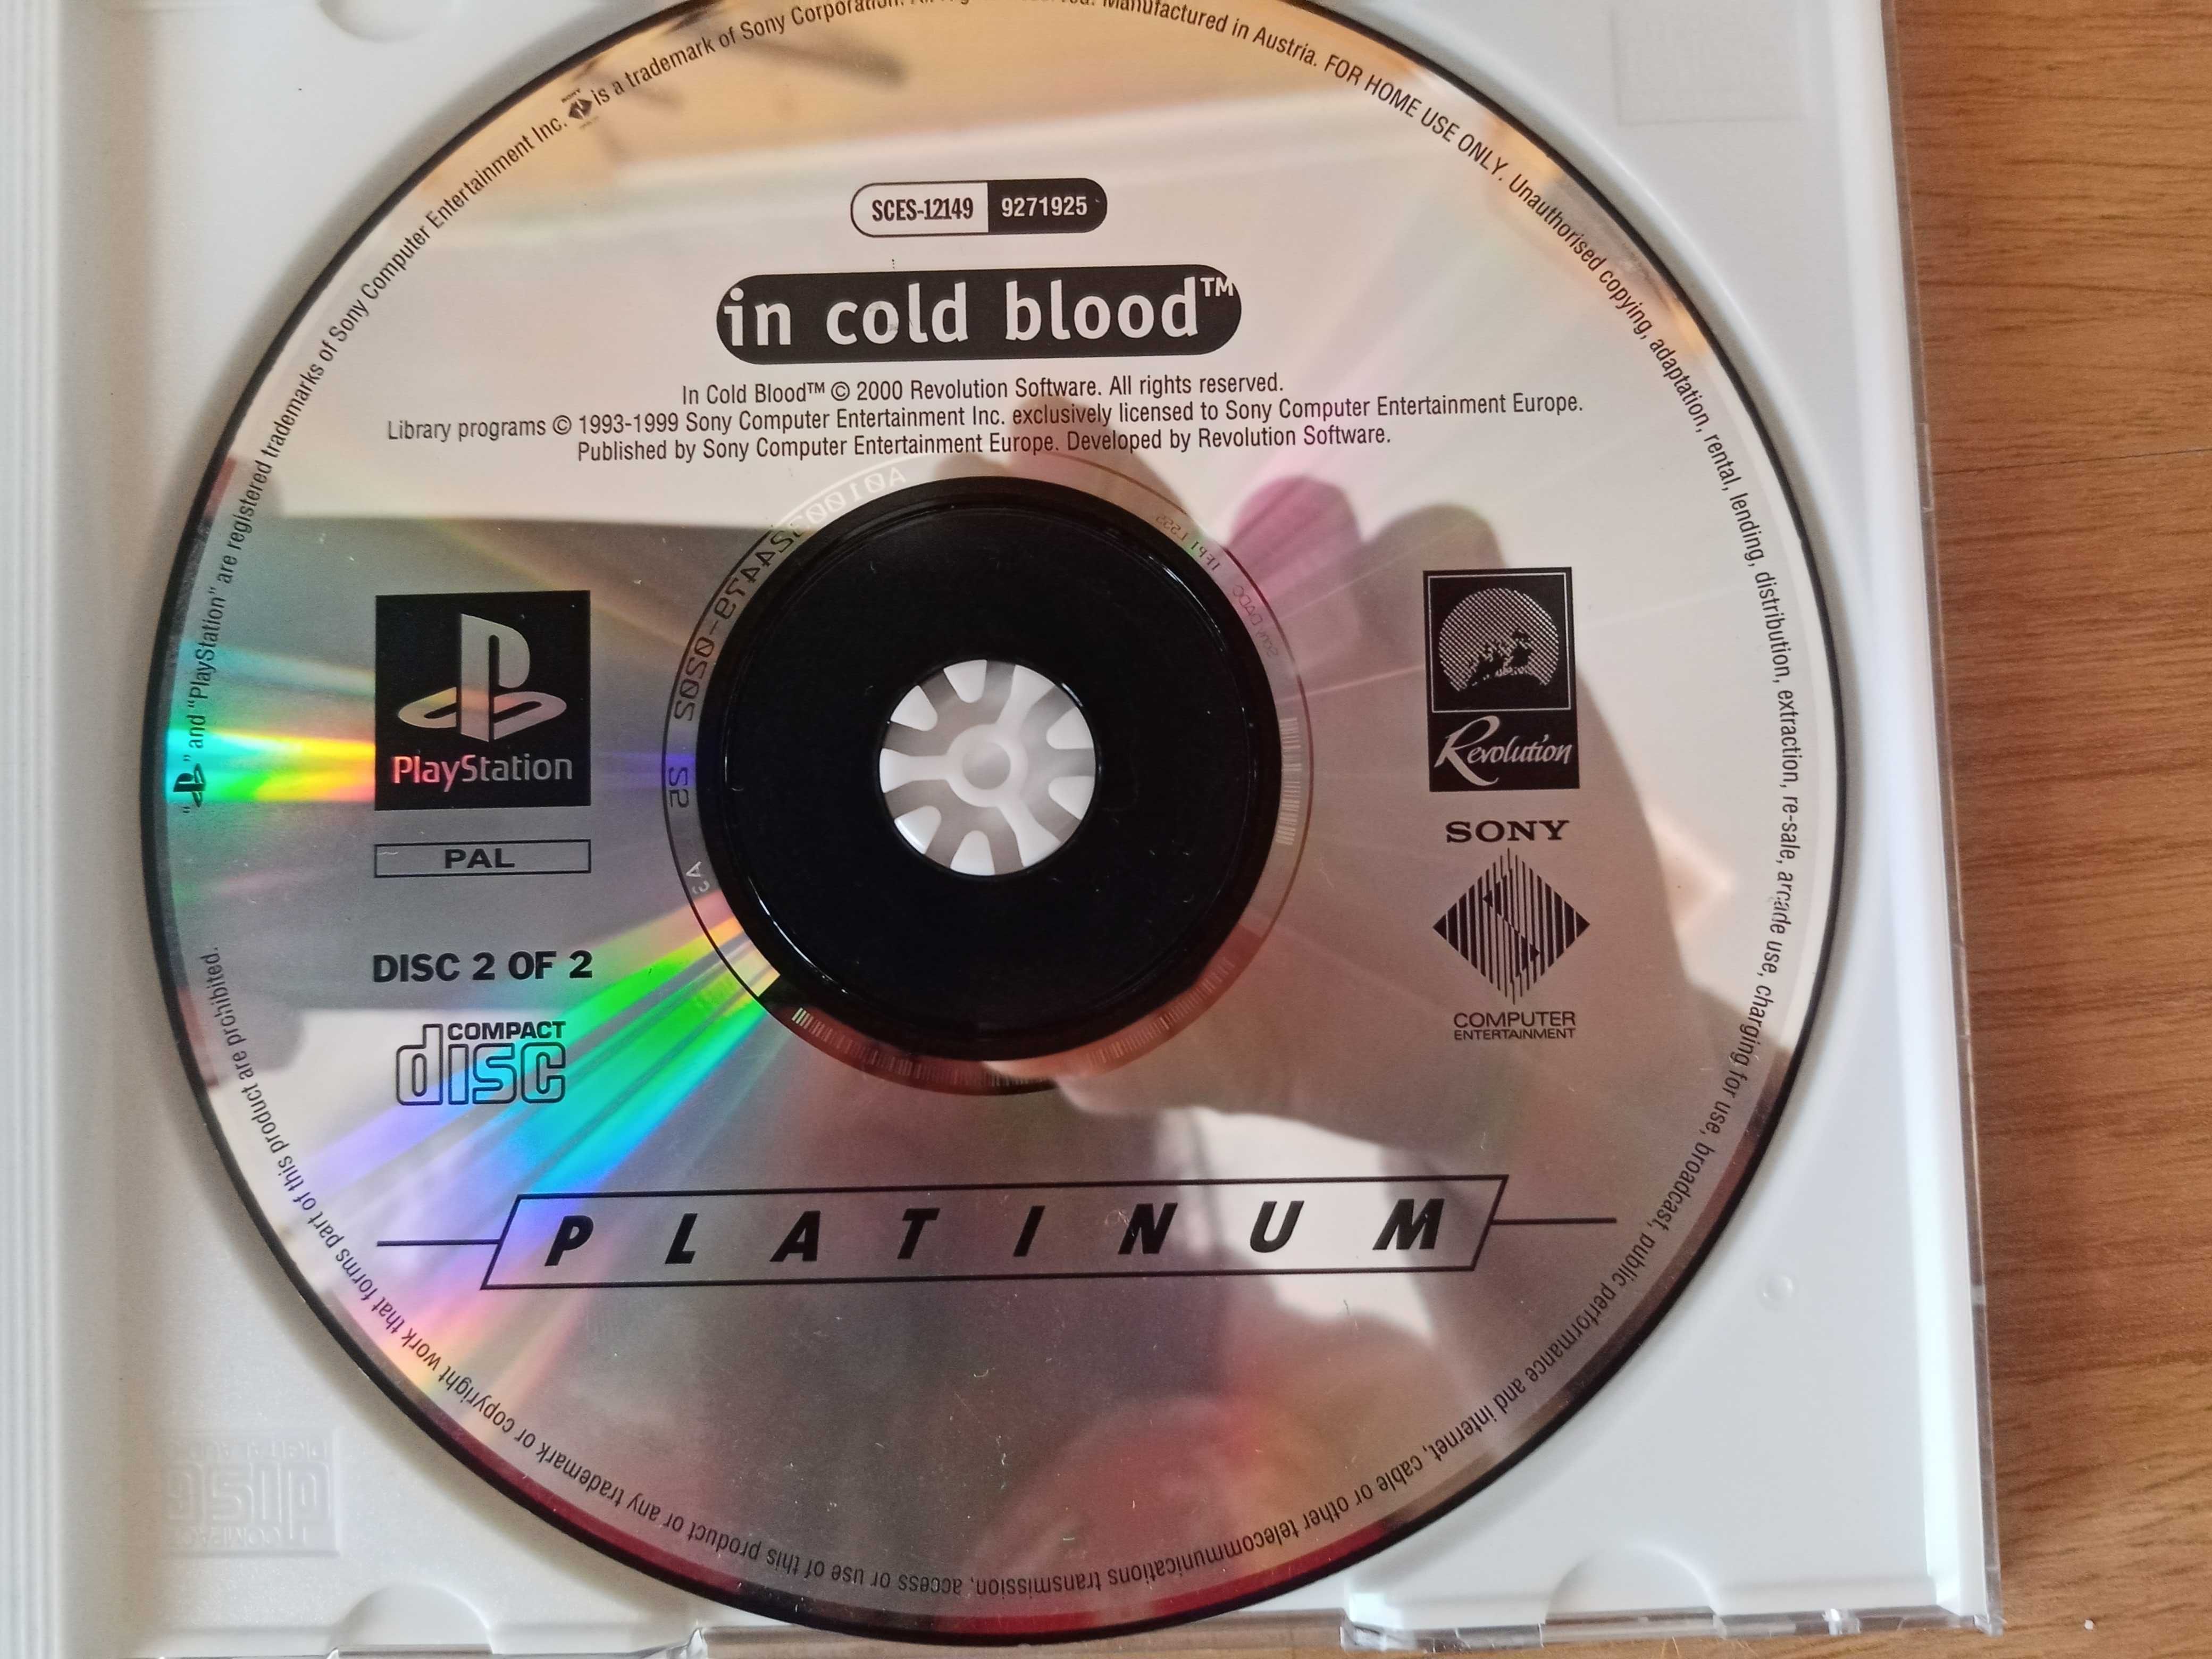 In cold blood Playstation 1